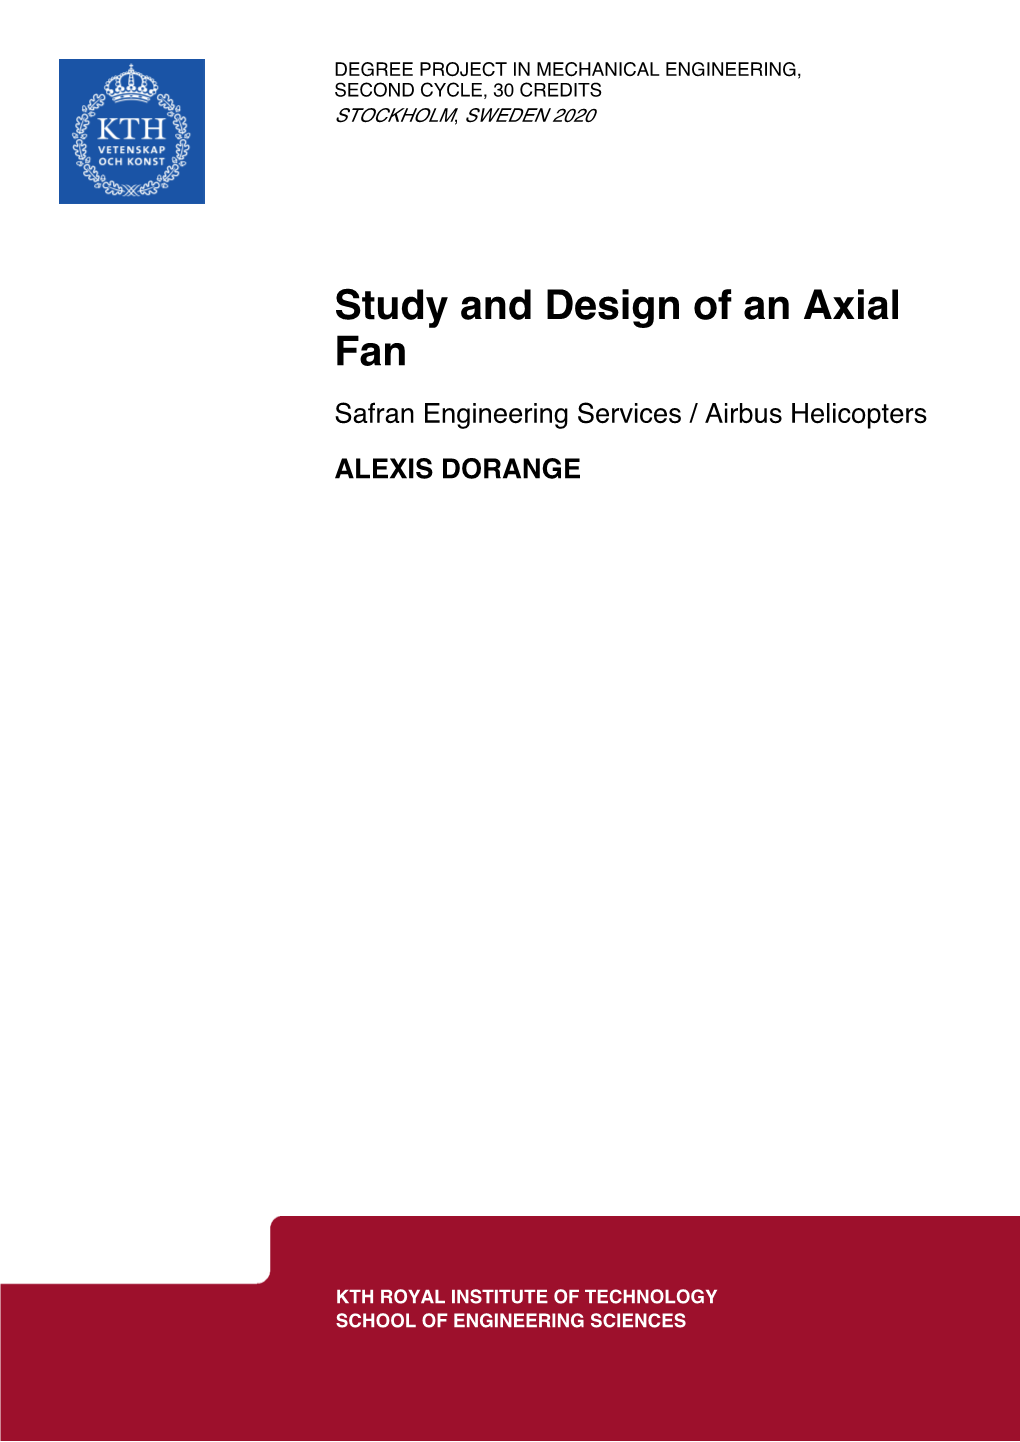 Study and Design of an Axial Fan Safran Engineering Services / Airbus Helicopters